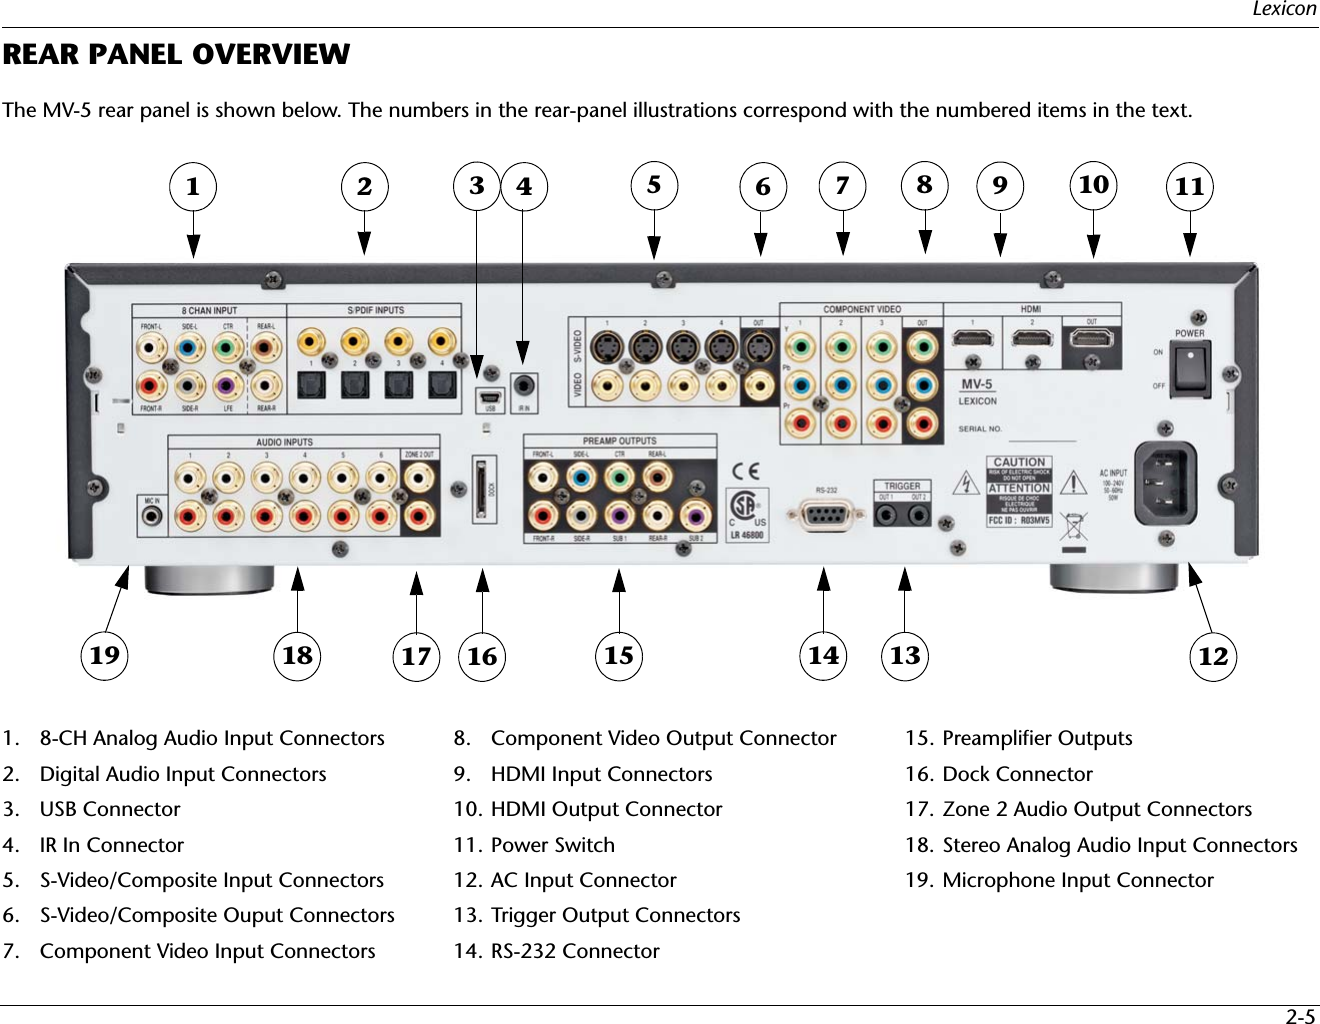 Lexicon2-5REAR PANEL OVERVIEWThe MV-5 rear panel is shown below. The numbers in the rear-panel illustrations correspond with the numbered items in the text.1. 8-CH Analog Audio Input Connectors2. Digital Audio Input Connectors3. USB Connector4. IR In Connector5. S-Video/Composite Input Connectors6. S-Video/Composite Ouput Connectors7. Component Video Input Connectors8. Component Video Output Connector9. HDMI Input Connectors10. HDMI Output Connector11. Power Switch12. AC Input Connector13. Trigger Output Connectors14. RS-232 Connector15. Preamplifier Outputs16. Dock Connector17. Zone 2 Audio Output Connectors18. Stereo Analog Audio Input Connectors19. Microphone Input Connector19 1  2  5  6 318 1516 13 7  817 9 10 111214 4